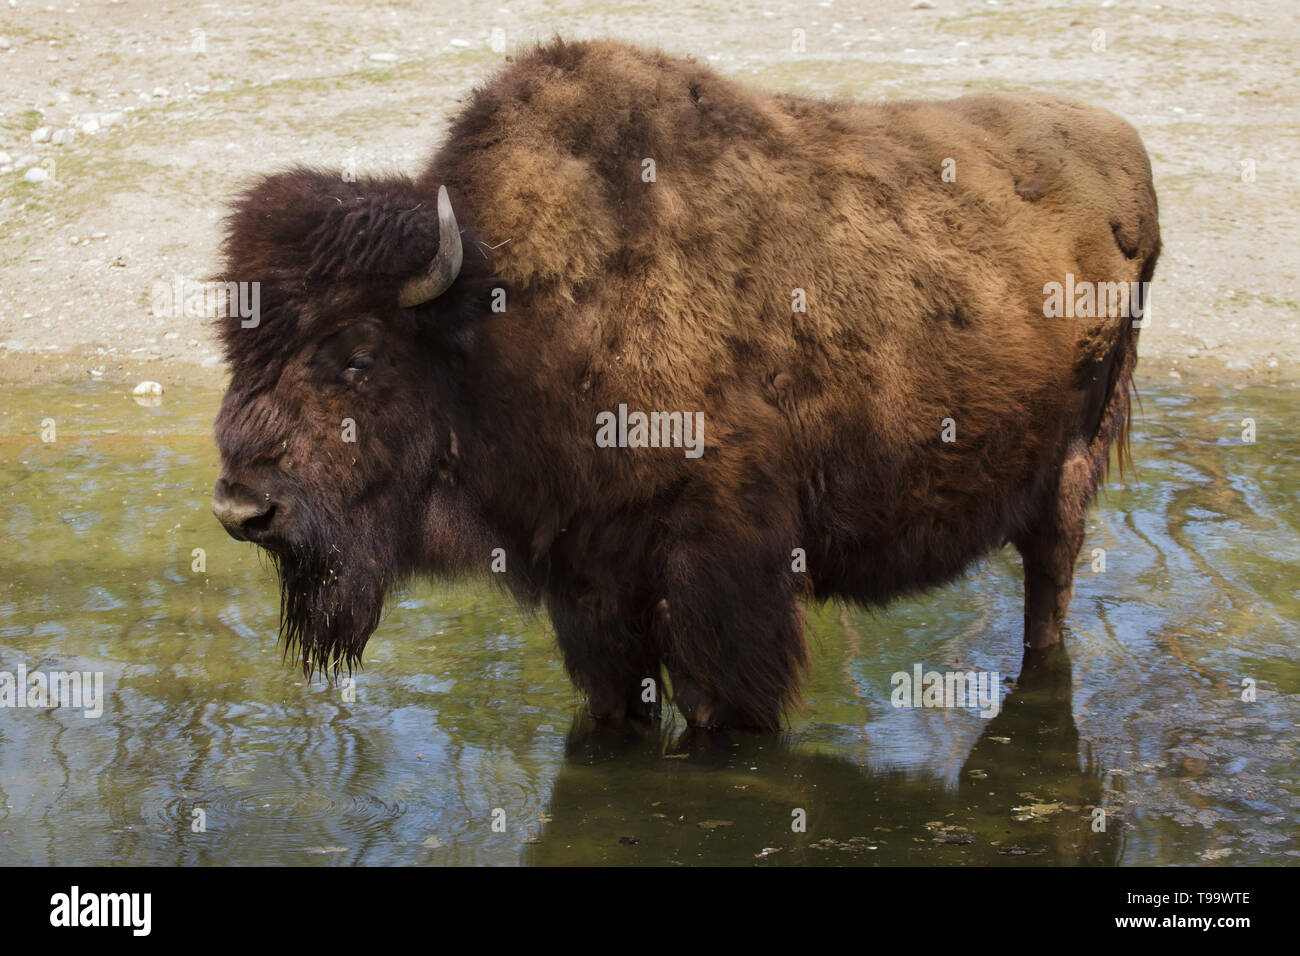 Wood bison (Bison bison athabascae), also known as the mountain bison. Stock Photo